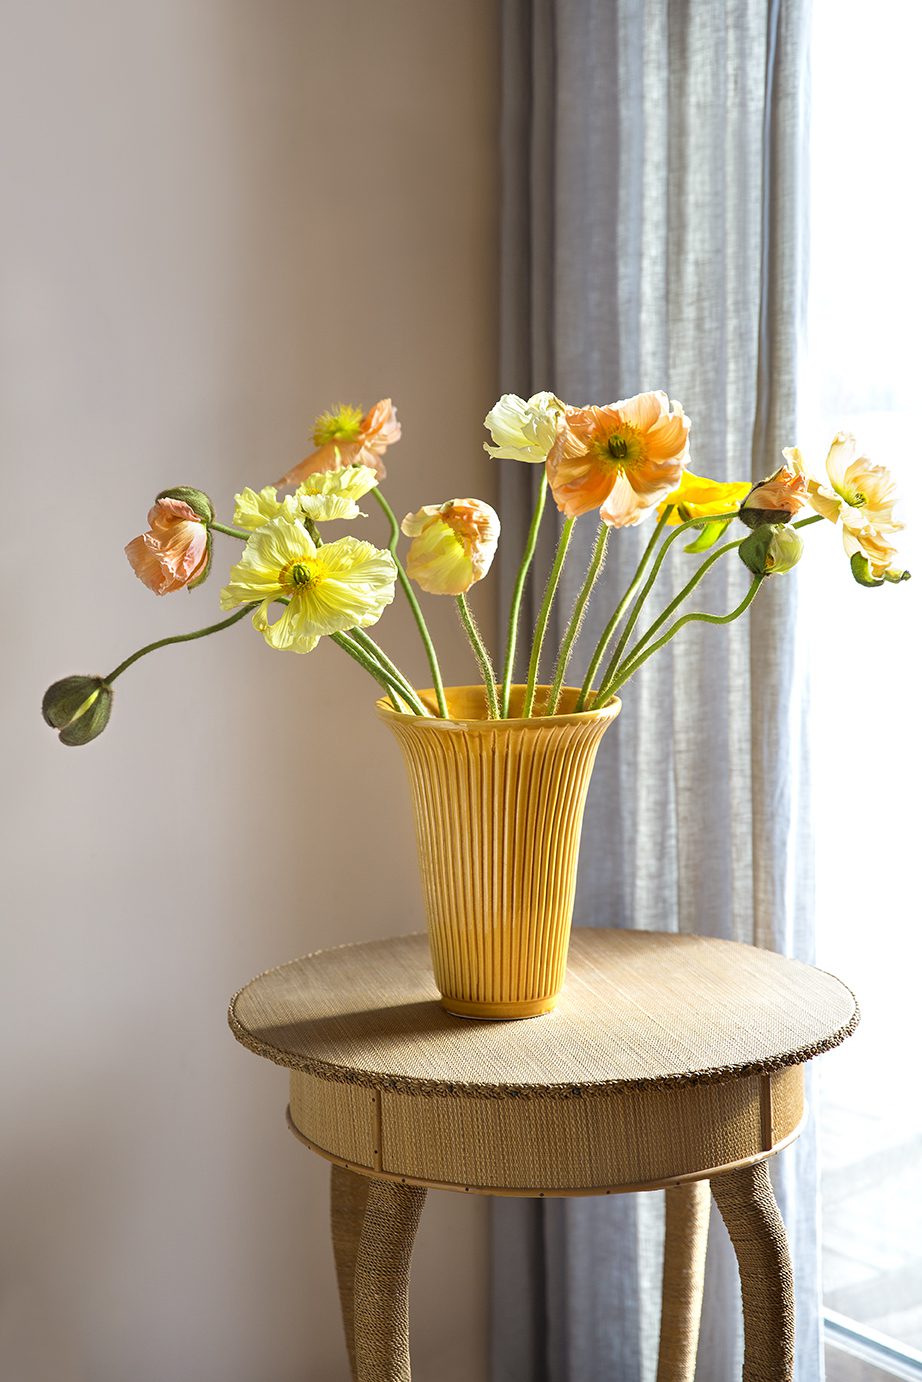 Yellow glazed vase with yellow flowers on a stool.